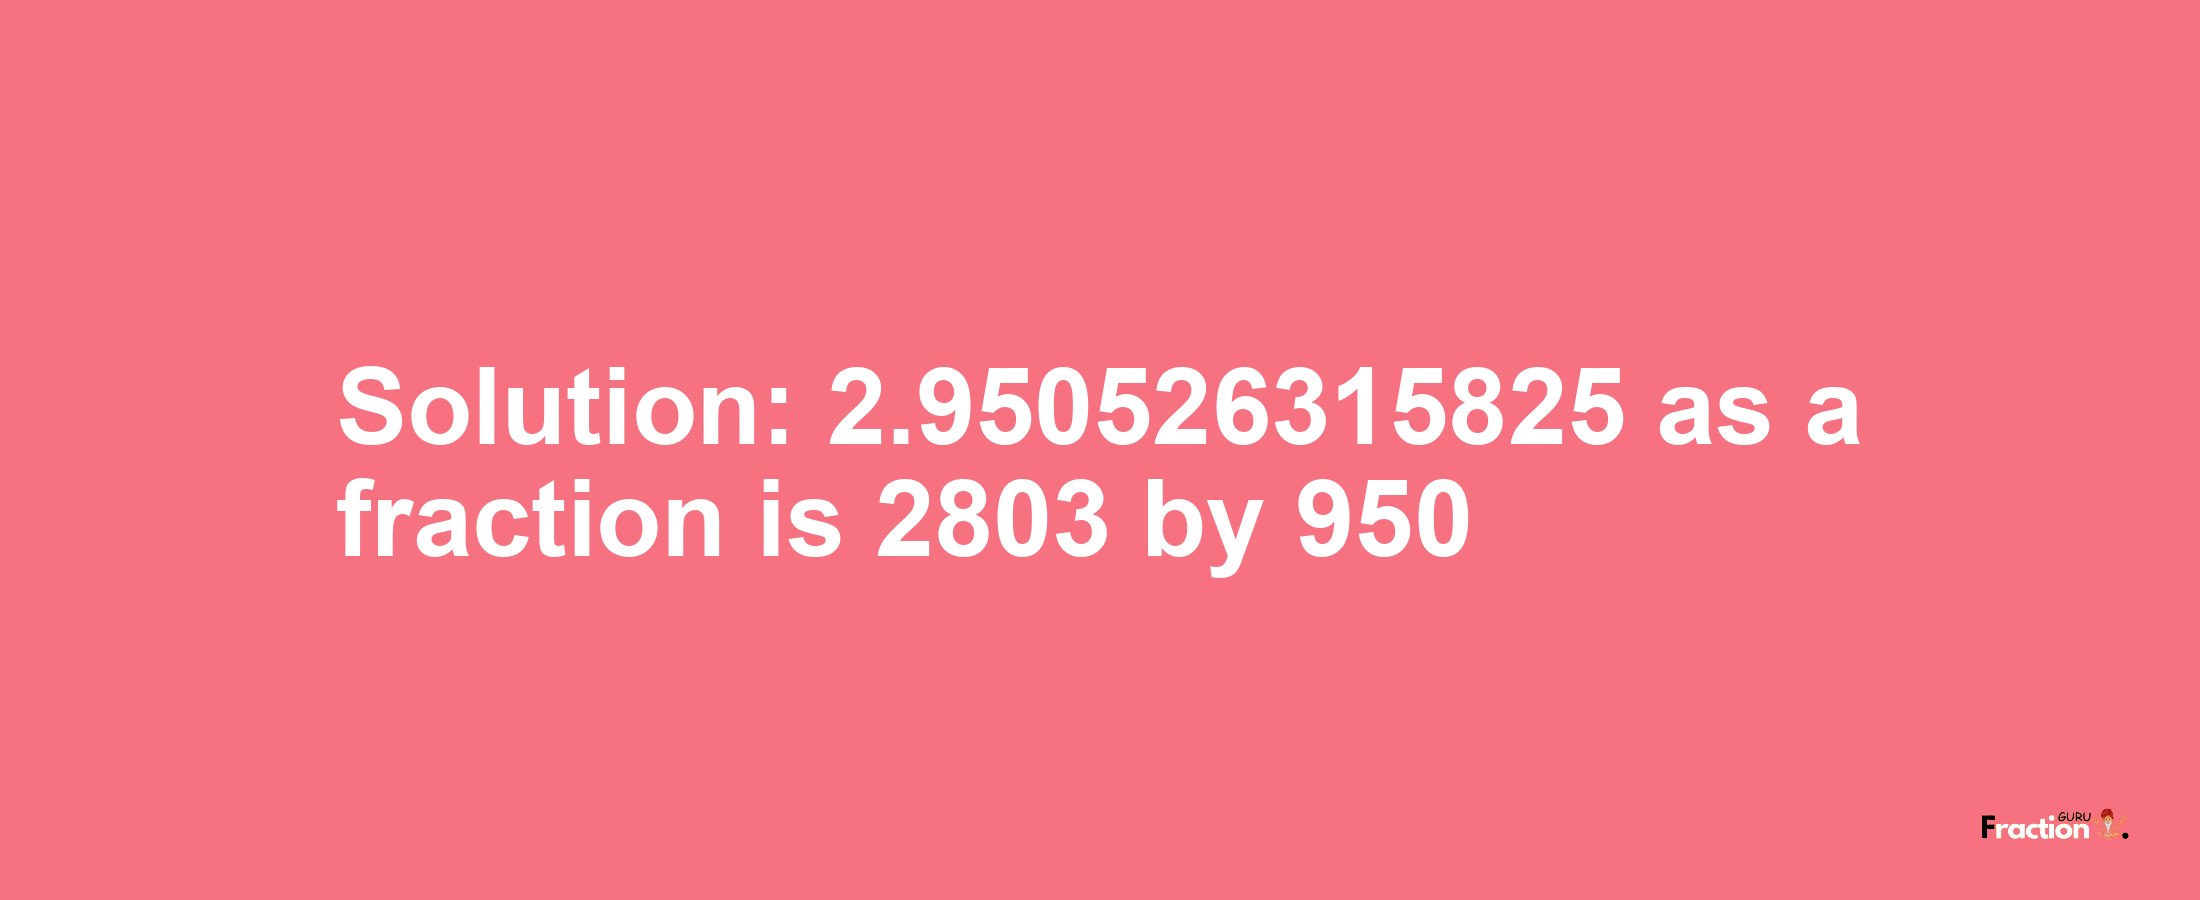 Solution:2.950526315825 as a fraction is 2803/950